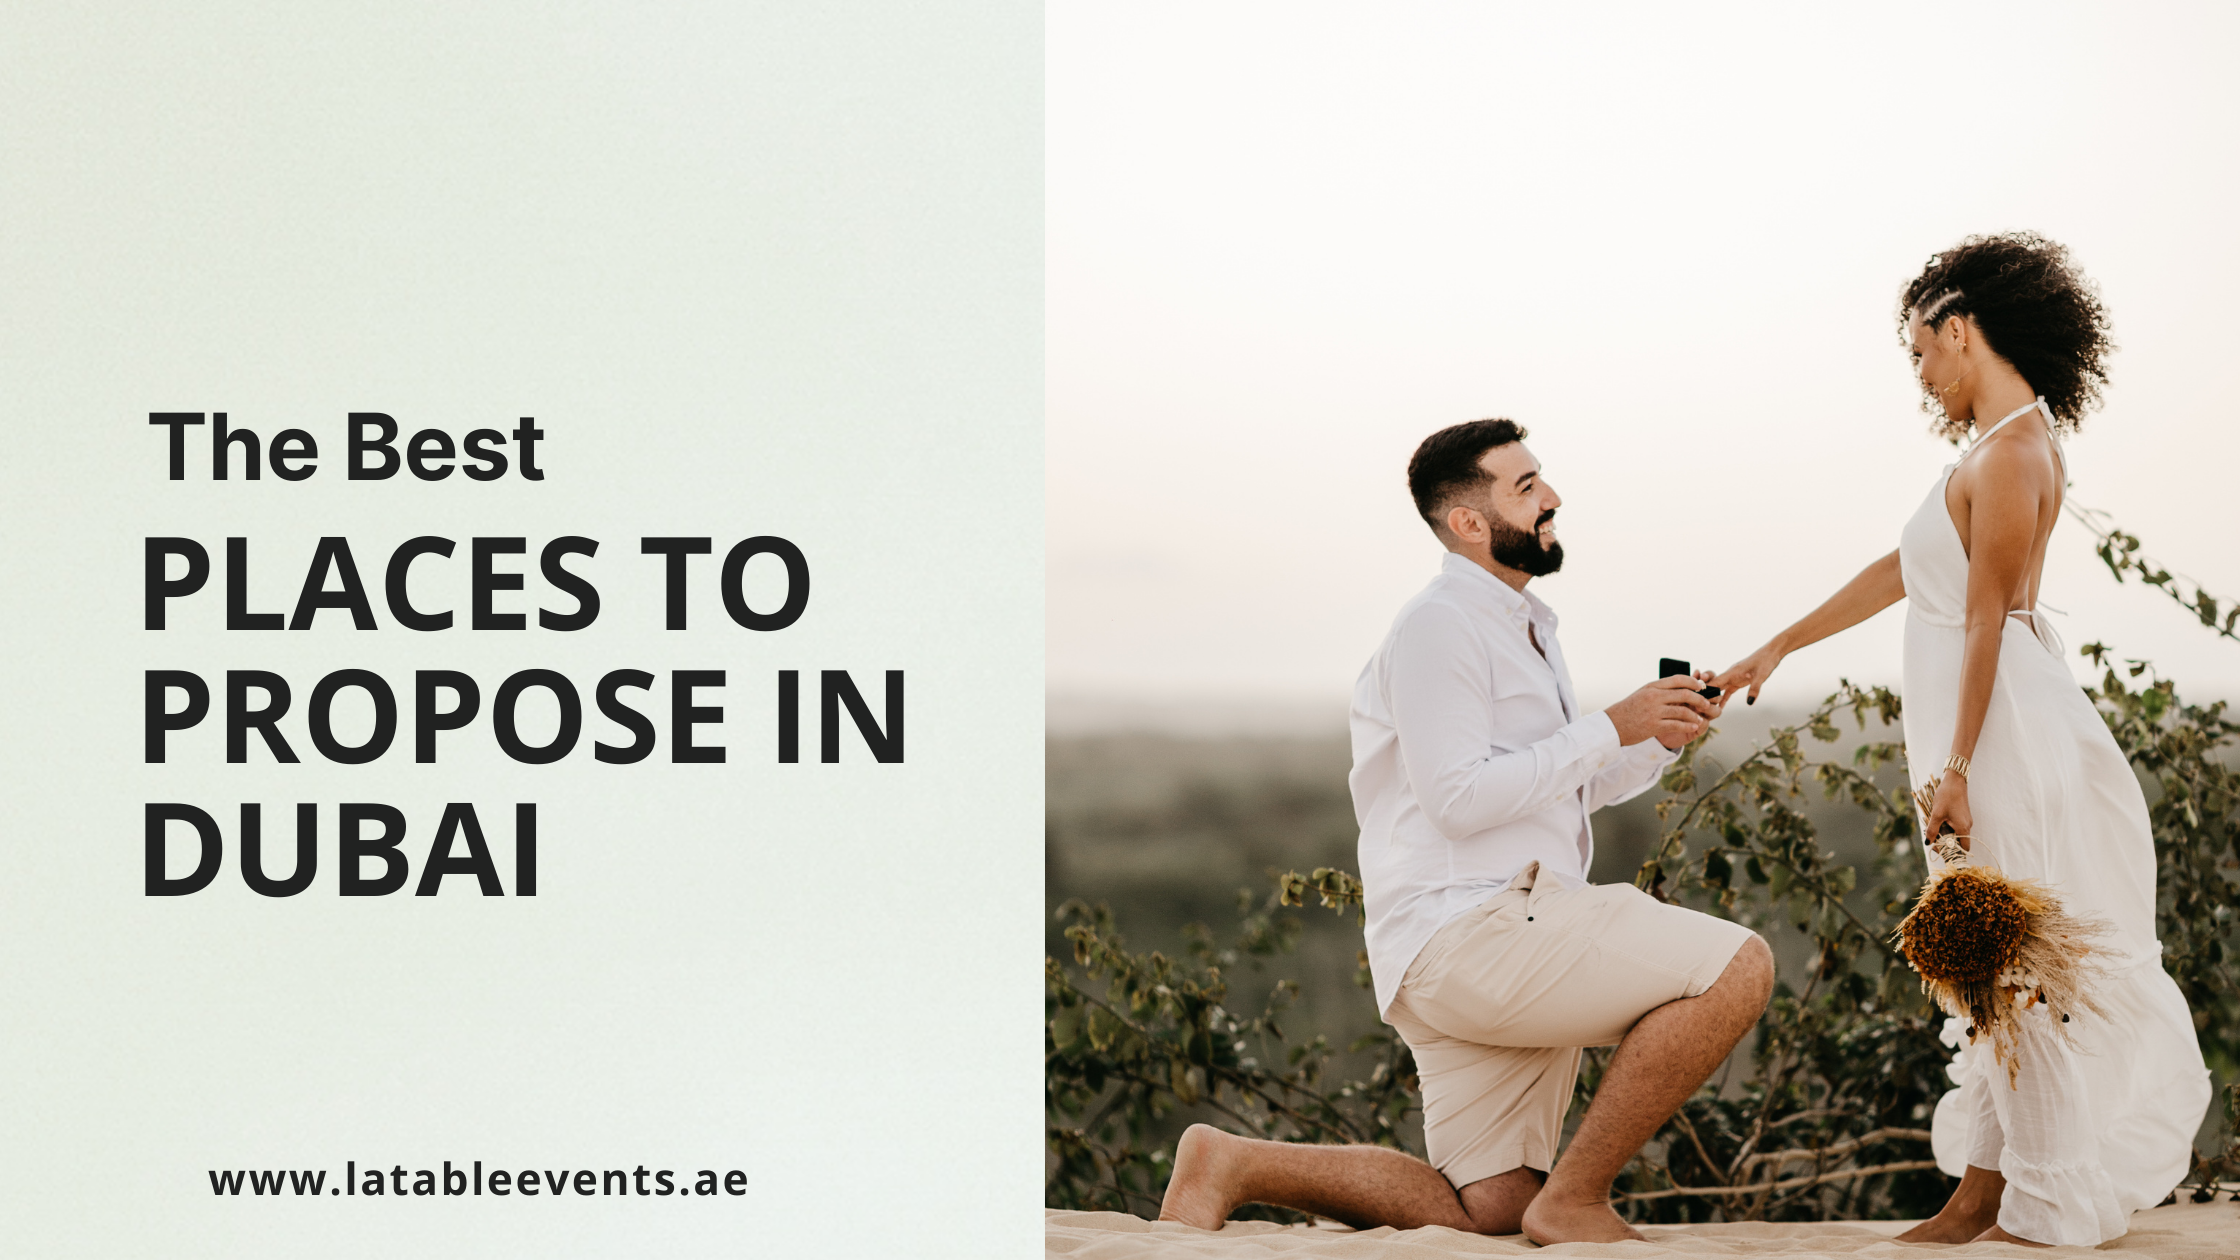 The Best Places to Propose in Dubai